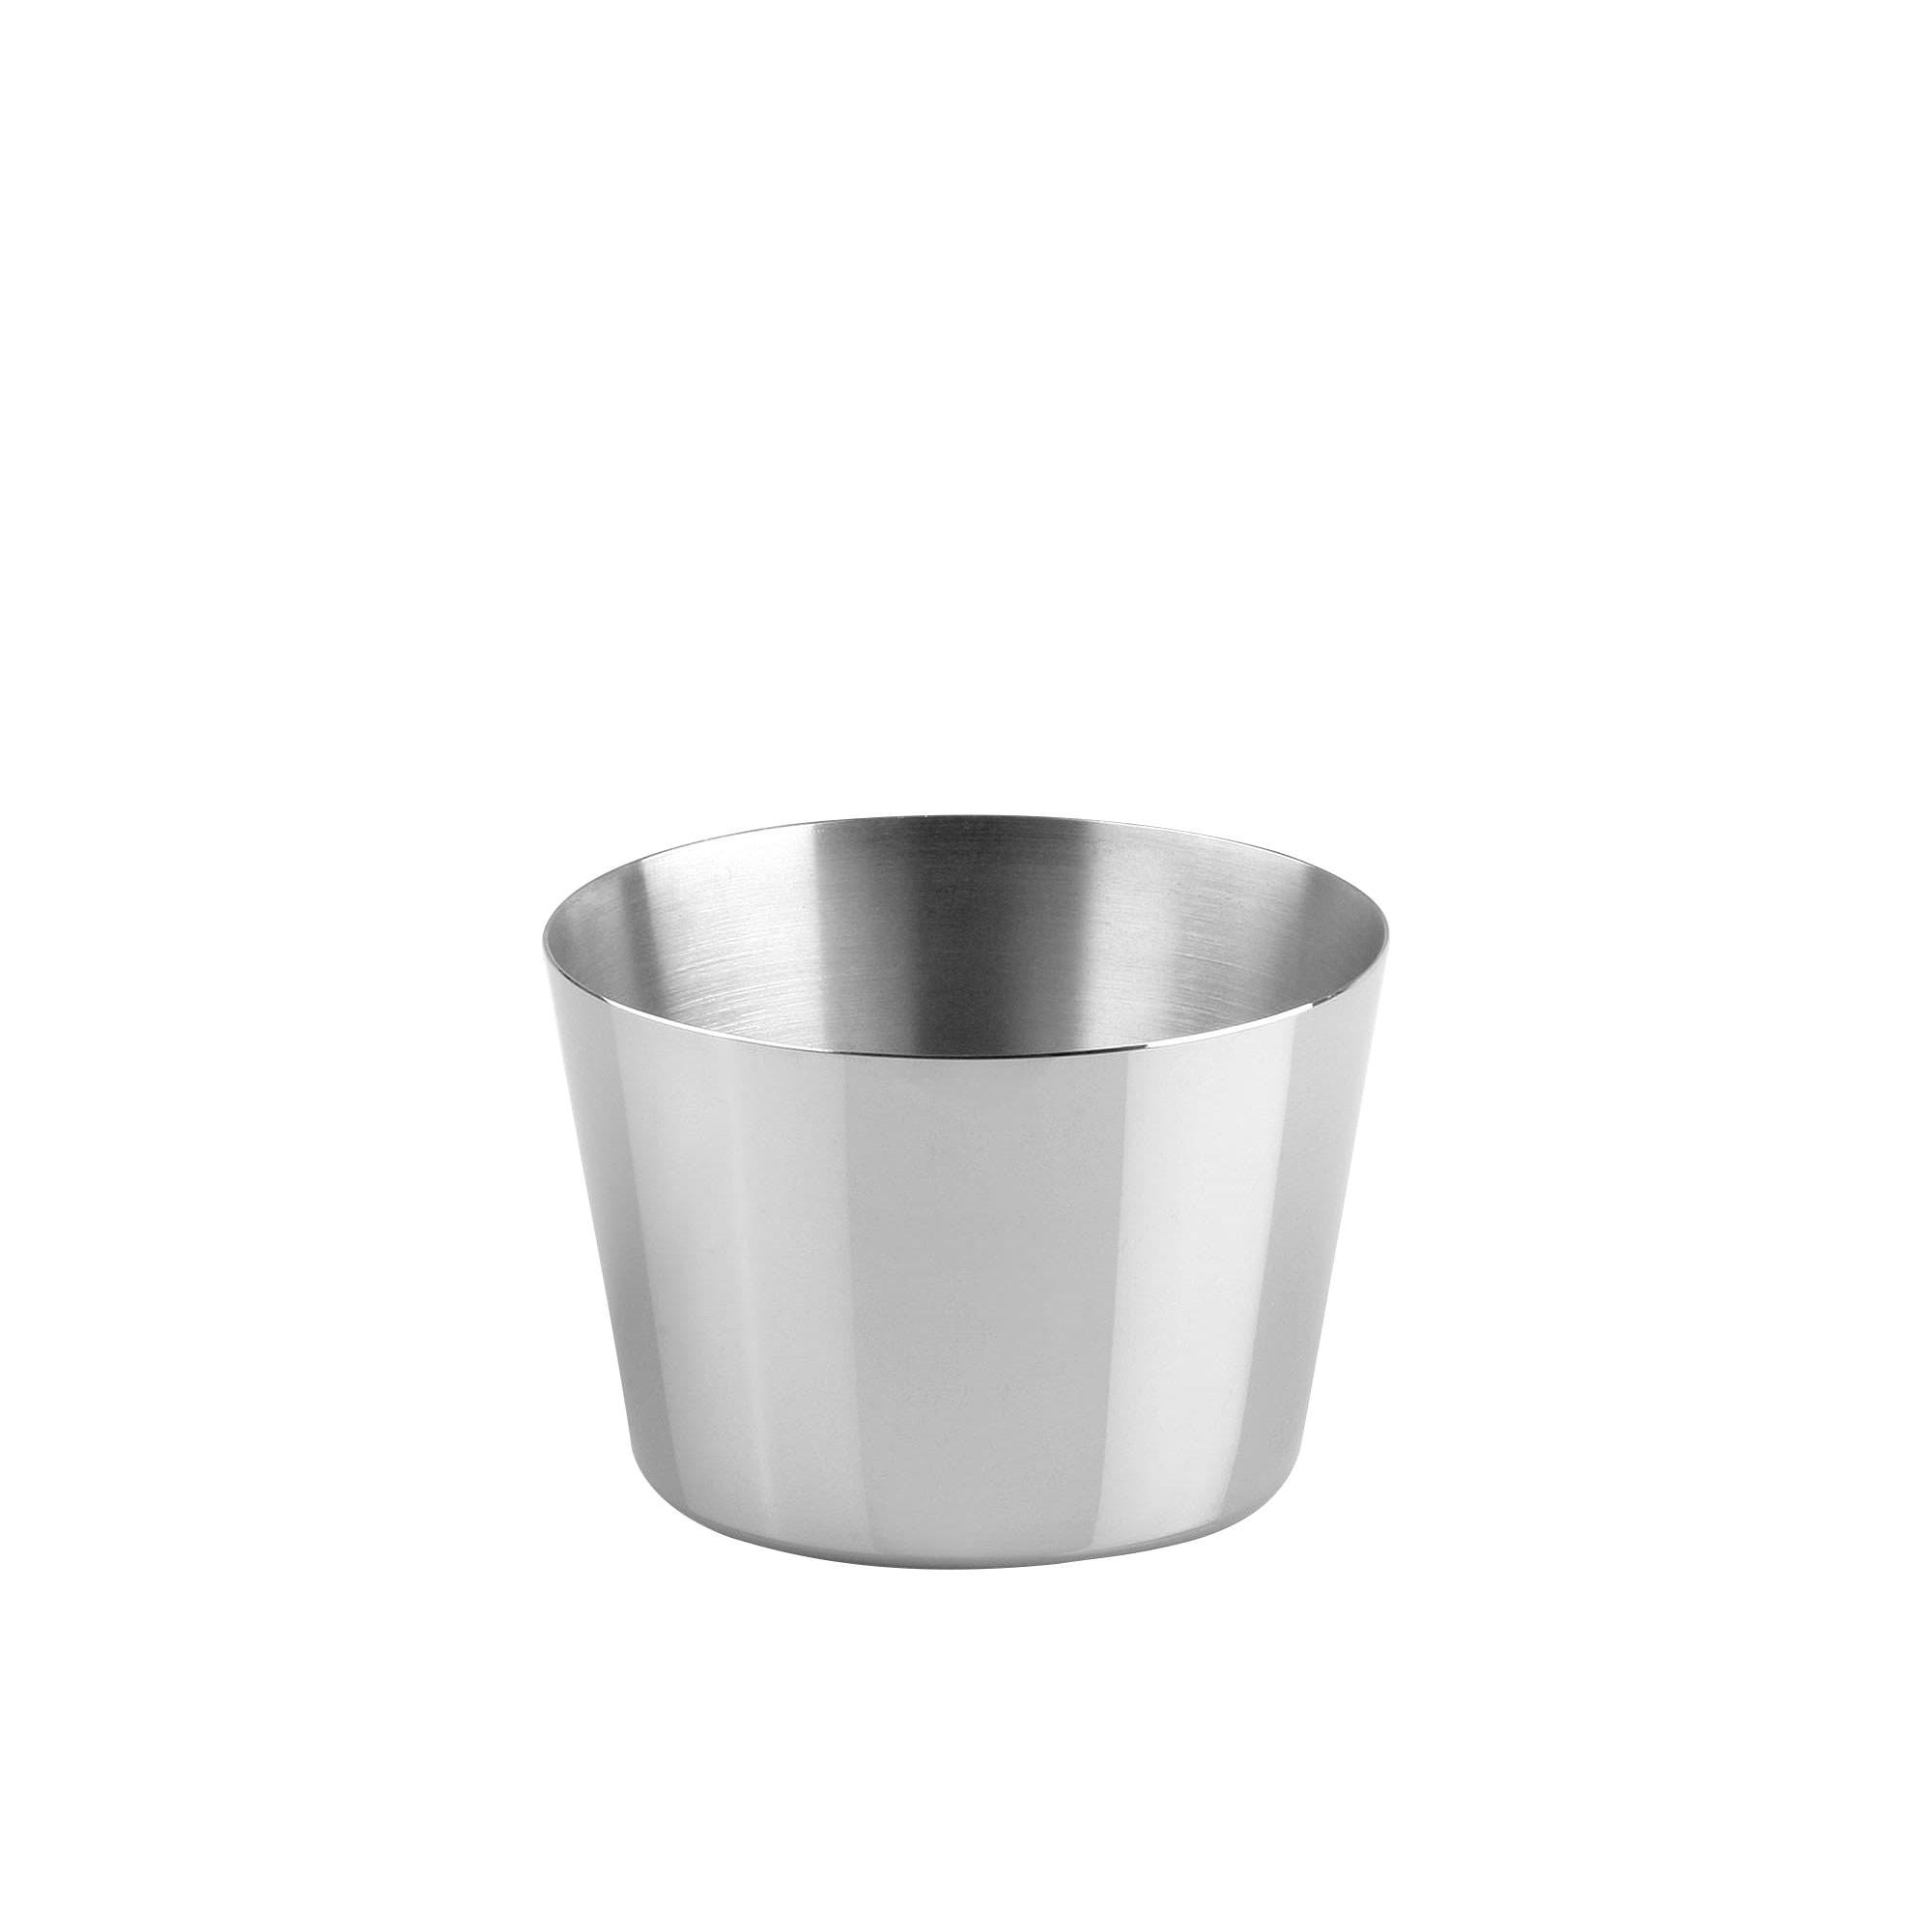 Chef Inox Stainless Steel Pudding Mould 8.5cm Image 1